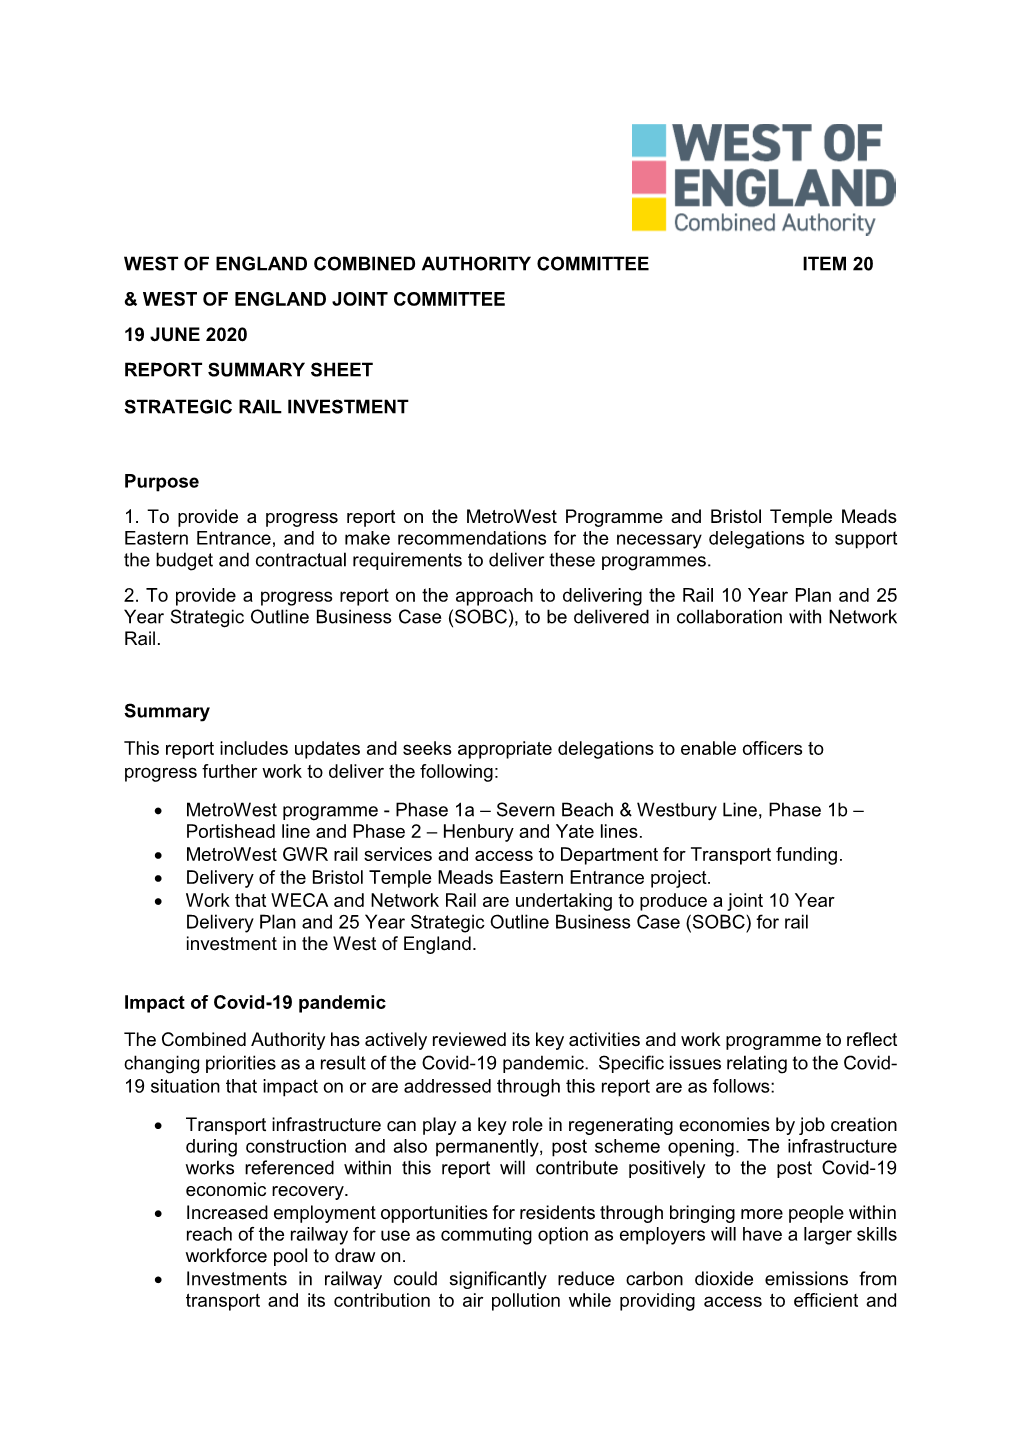 20 & West of England Joint Committee 19 June 2020 Report Summary Sheet Strategic Rail Investment